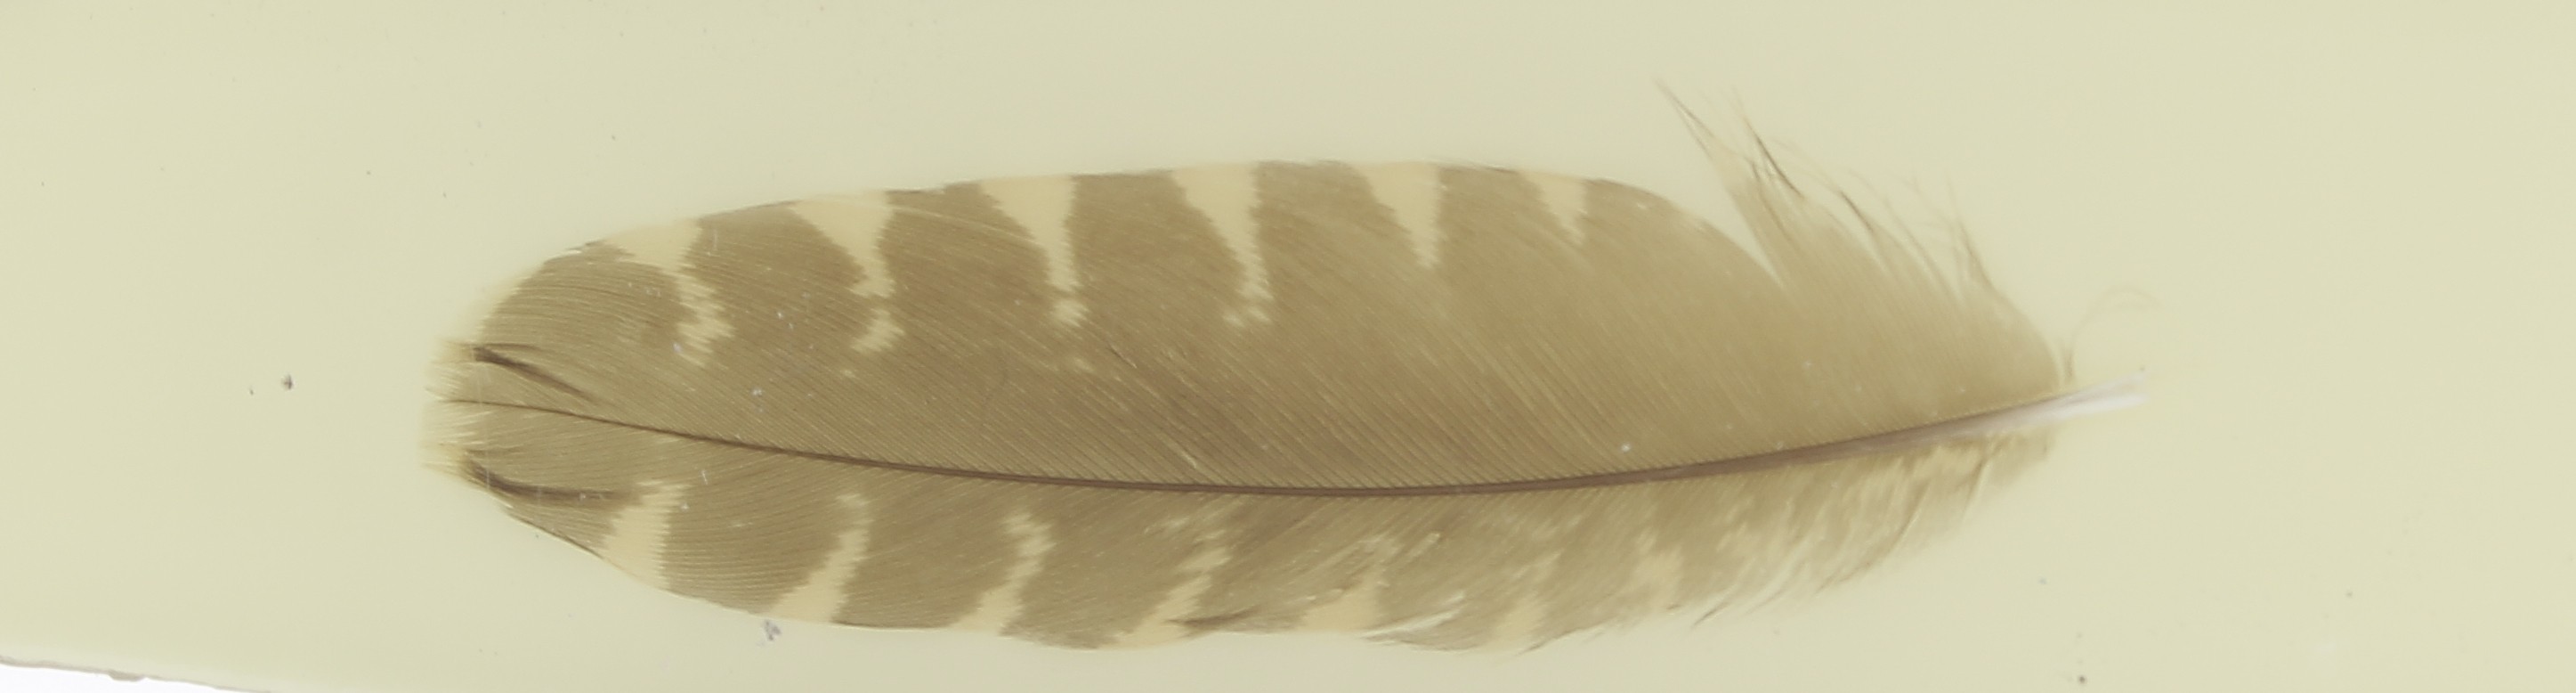  Inclusion of a feather becase